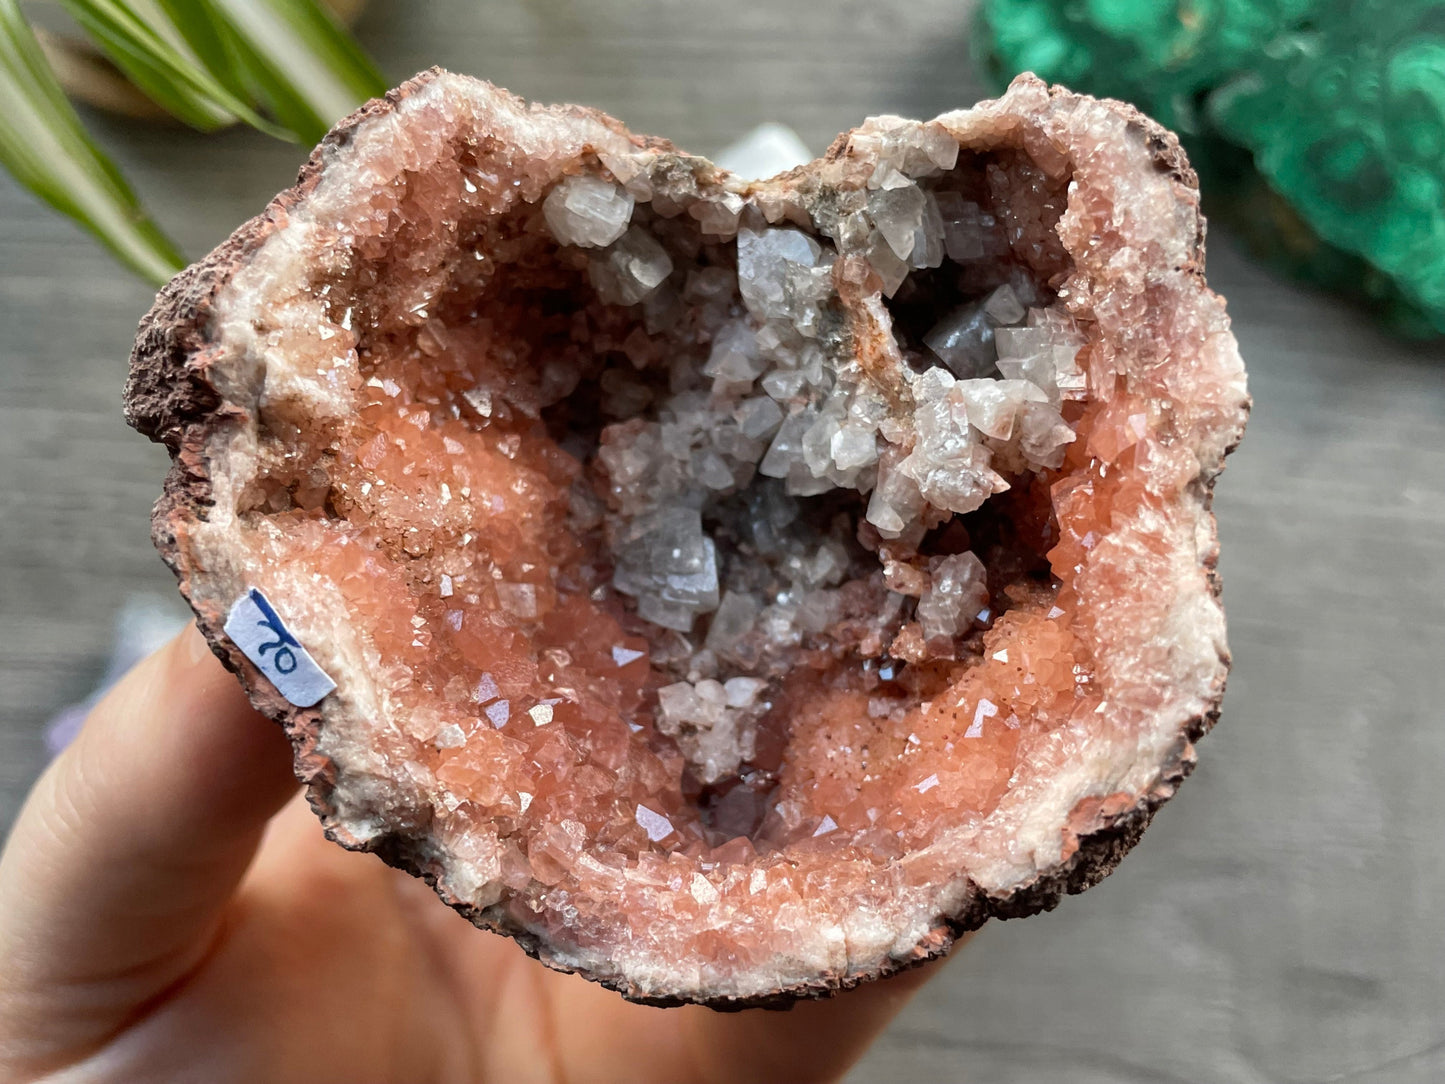 Pictured is a pink amethyst geode.